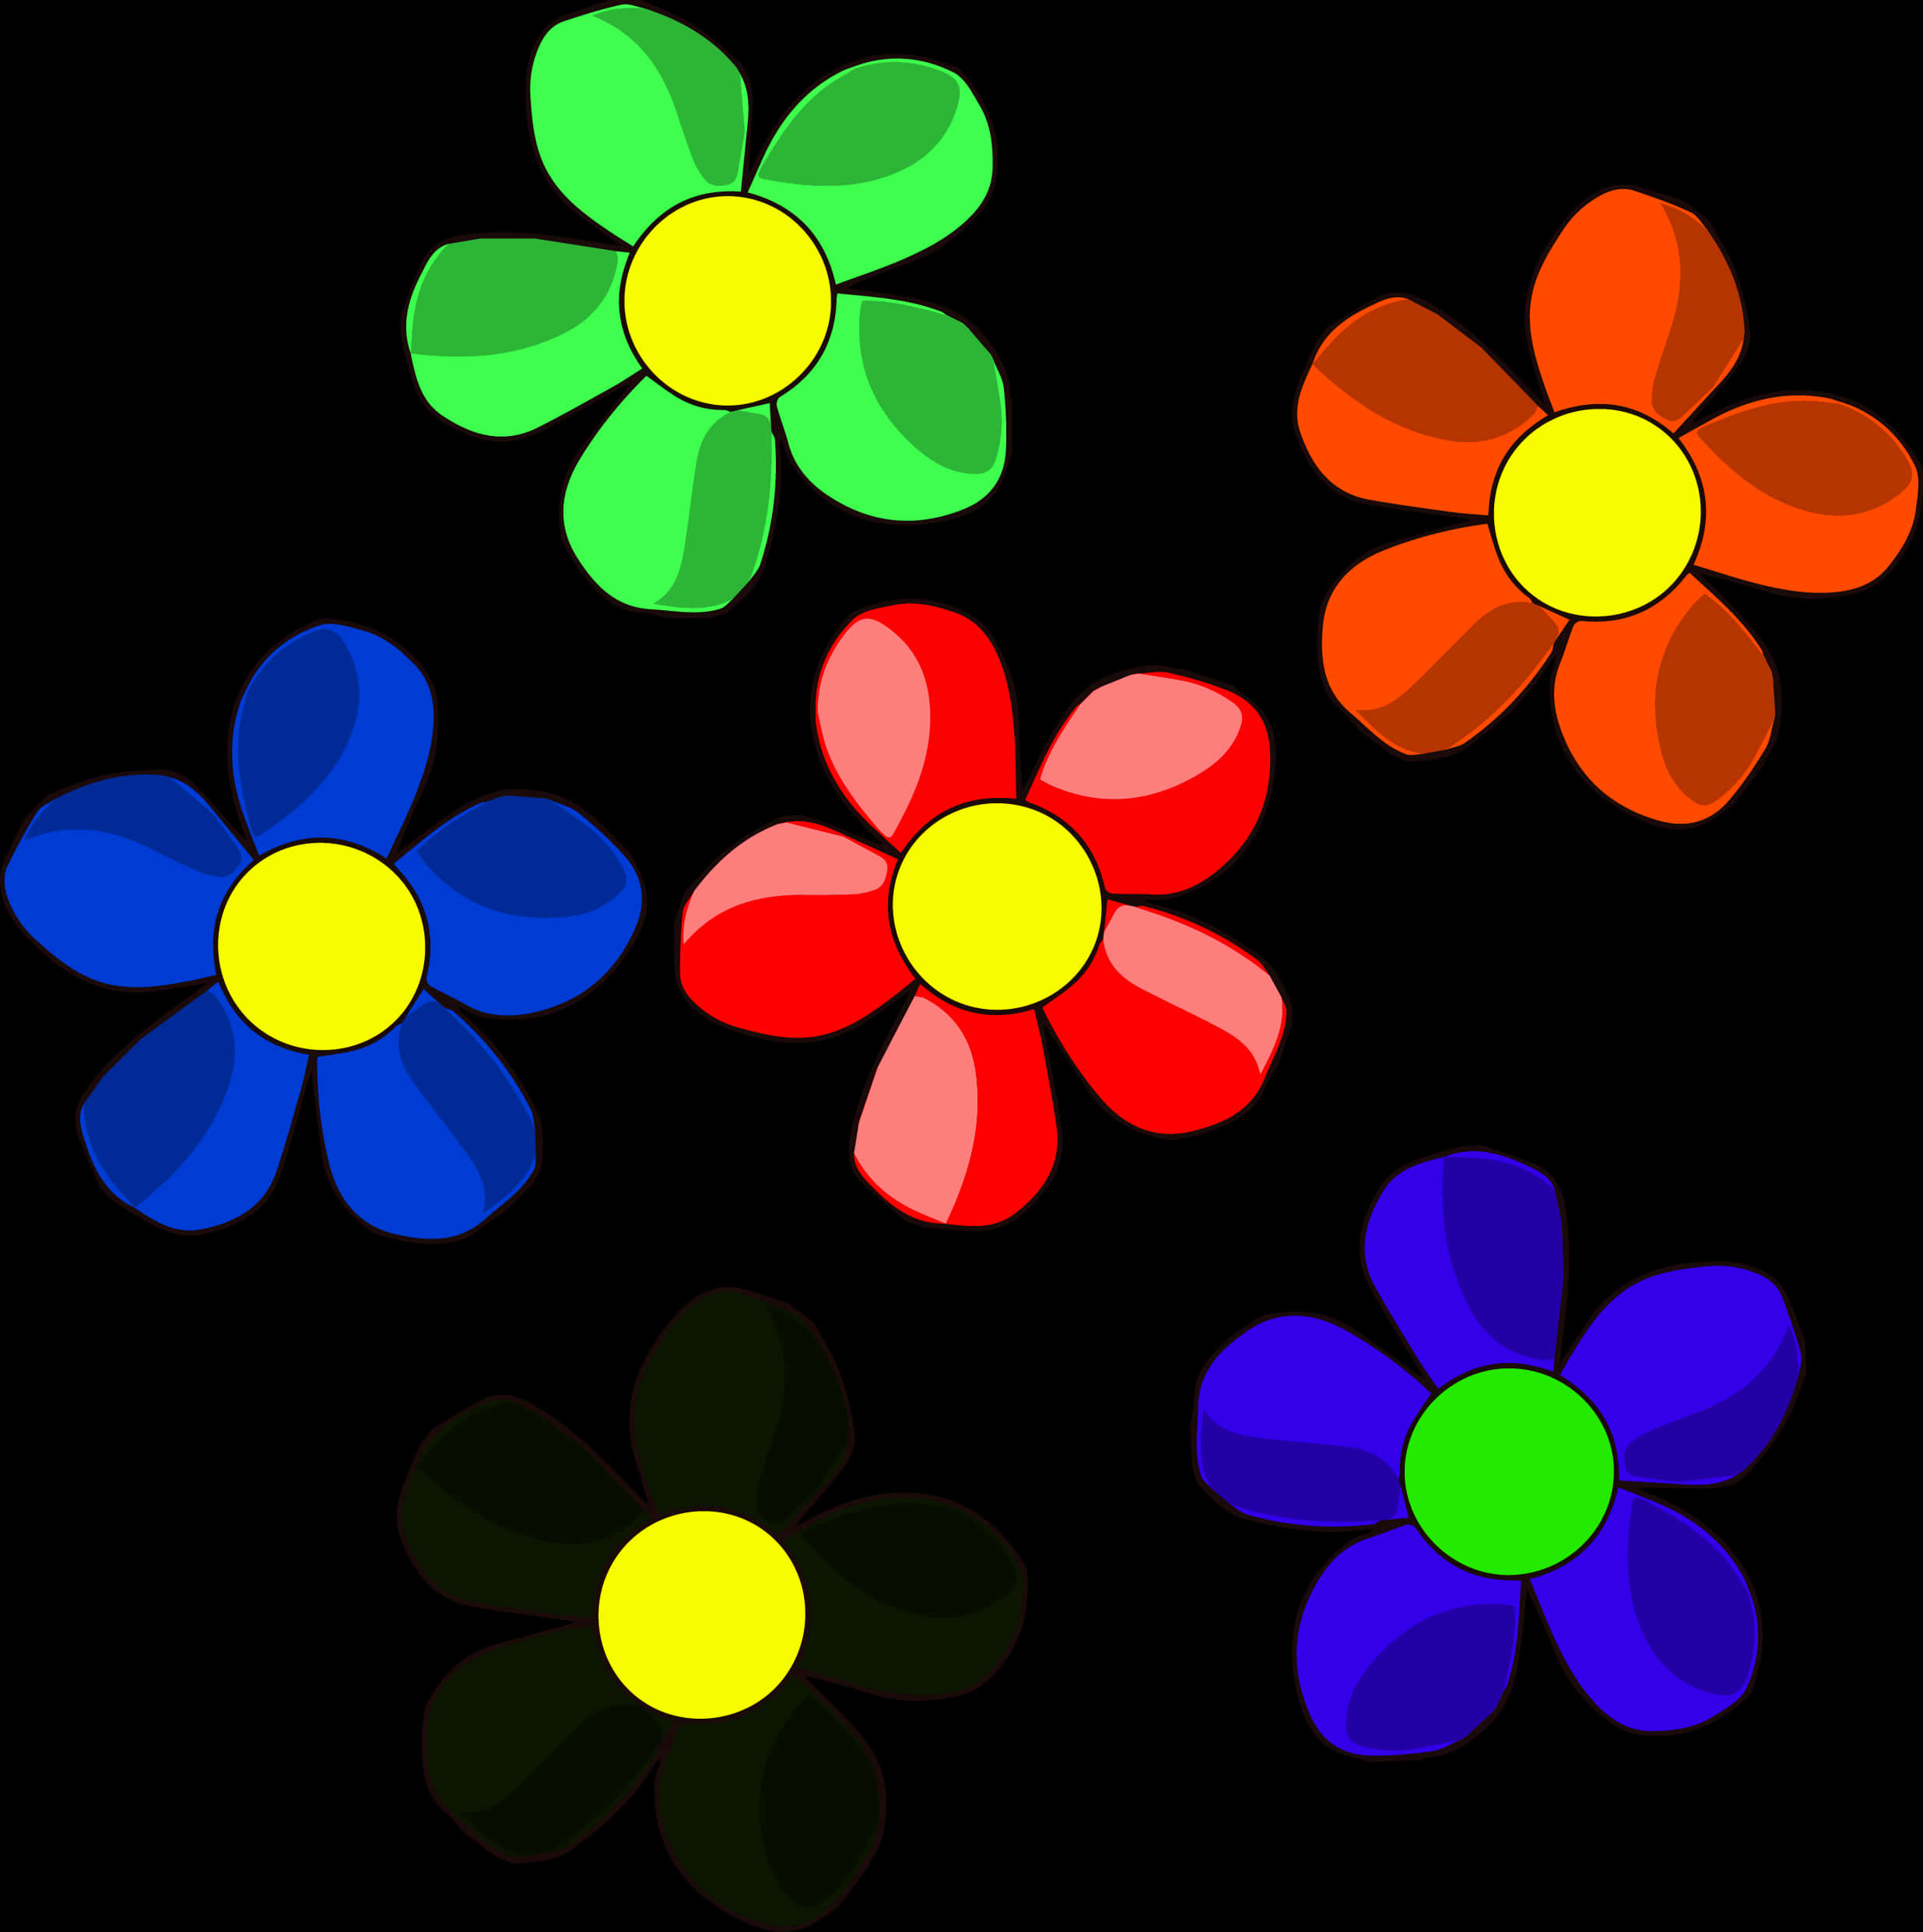 Colorful Daisy Flowers Vector Illustration